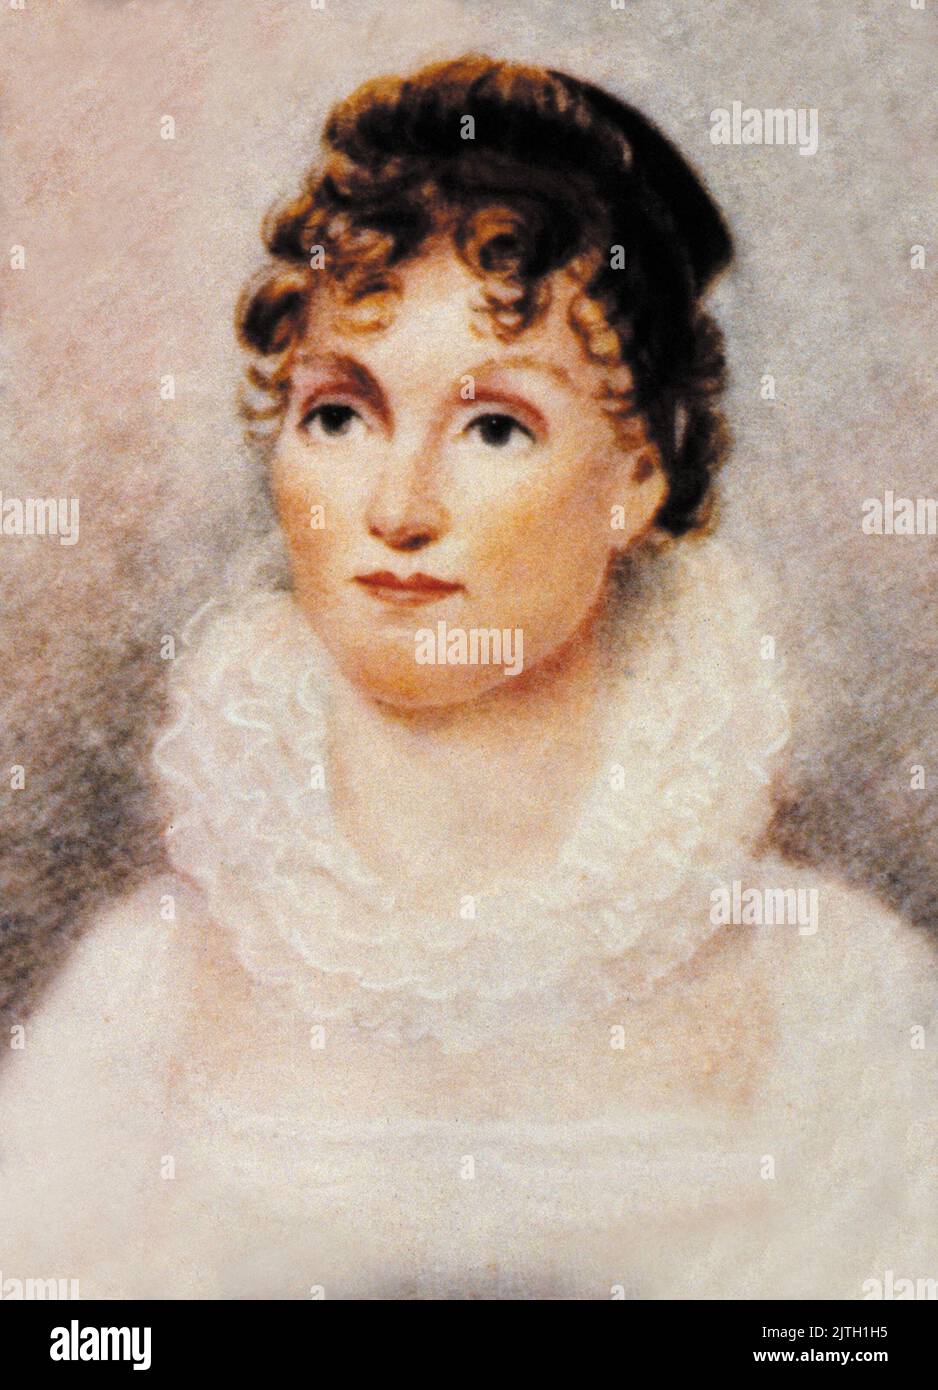 A portrait of President Martin Van Buren's wife Hannah Van Buren (née Hannah van Hoes. She died young from TB and never served as First Lady. Van Buren never remarried and his daughter in law Angelica Singleton Van Buren served as his First Lady. Stock Photo